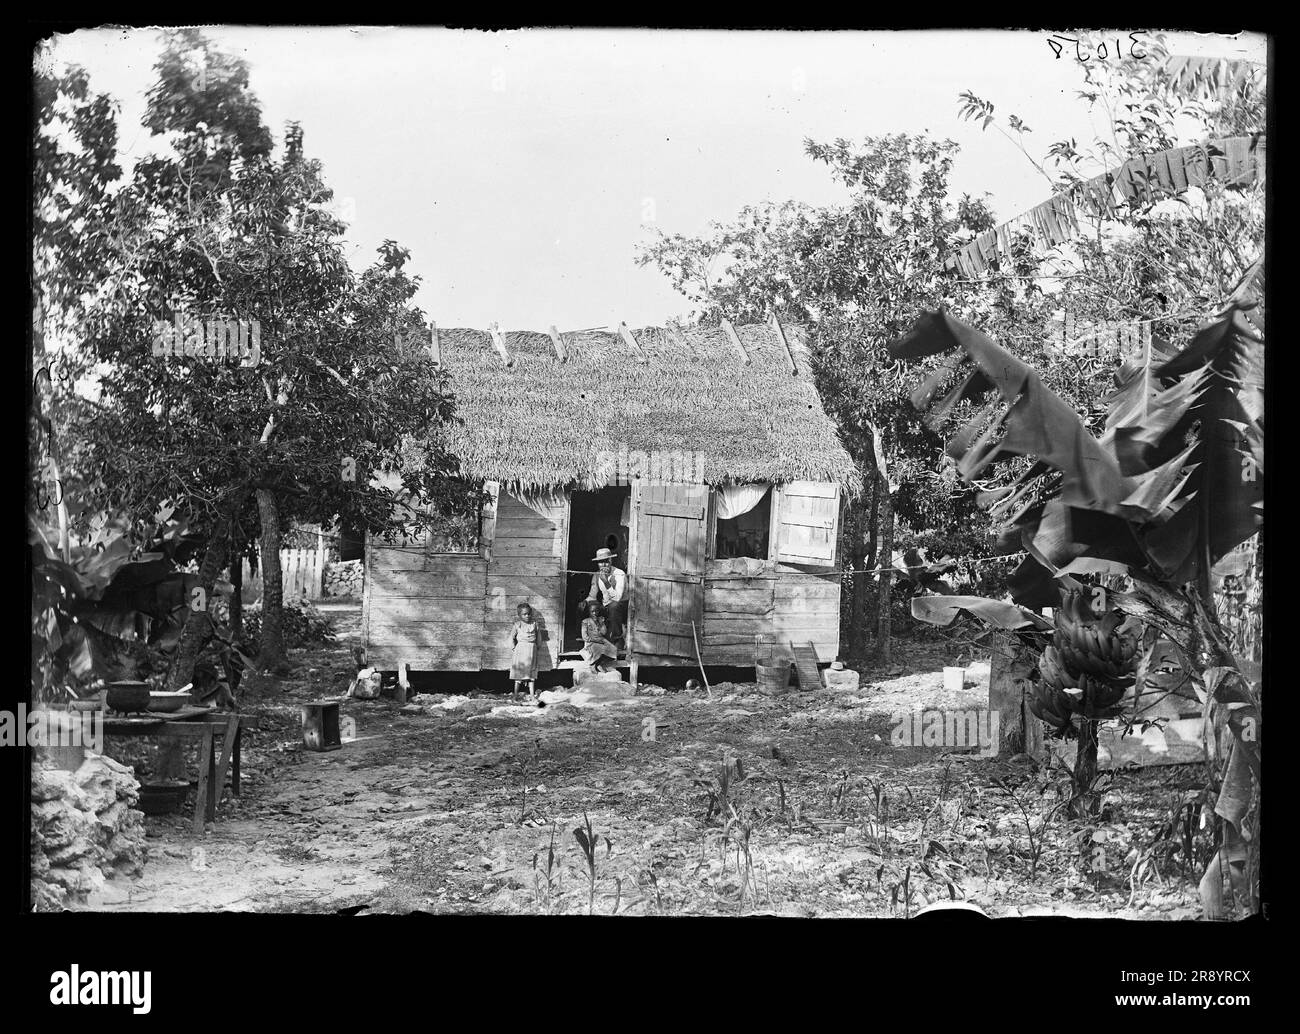 Thatched building and banana plant, possibly Nassau, Bahamas, between 1900 and 1915. Stock Photo